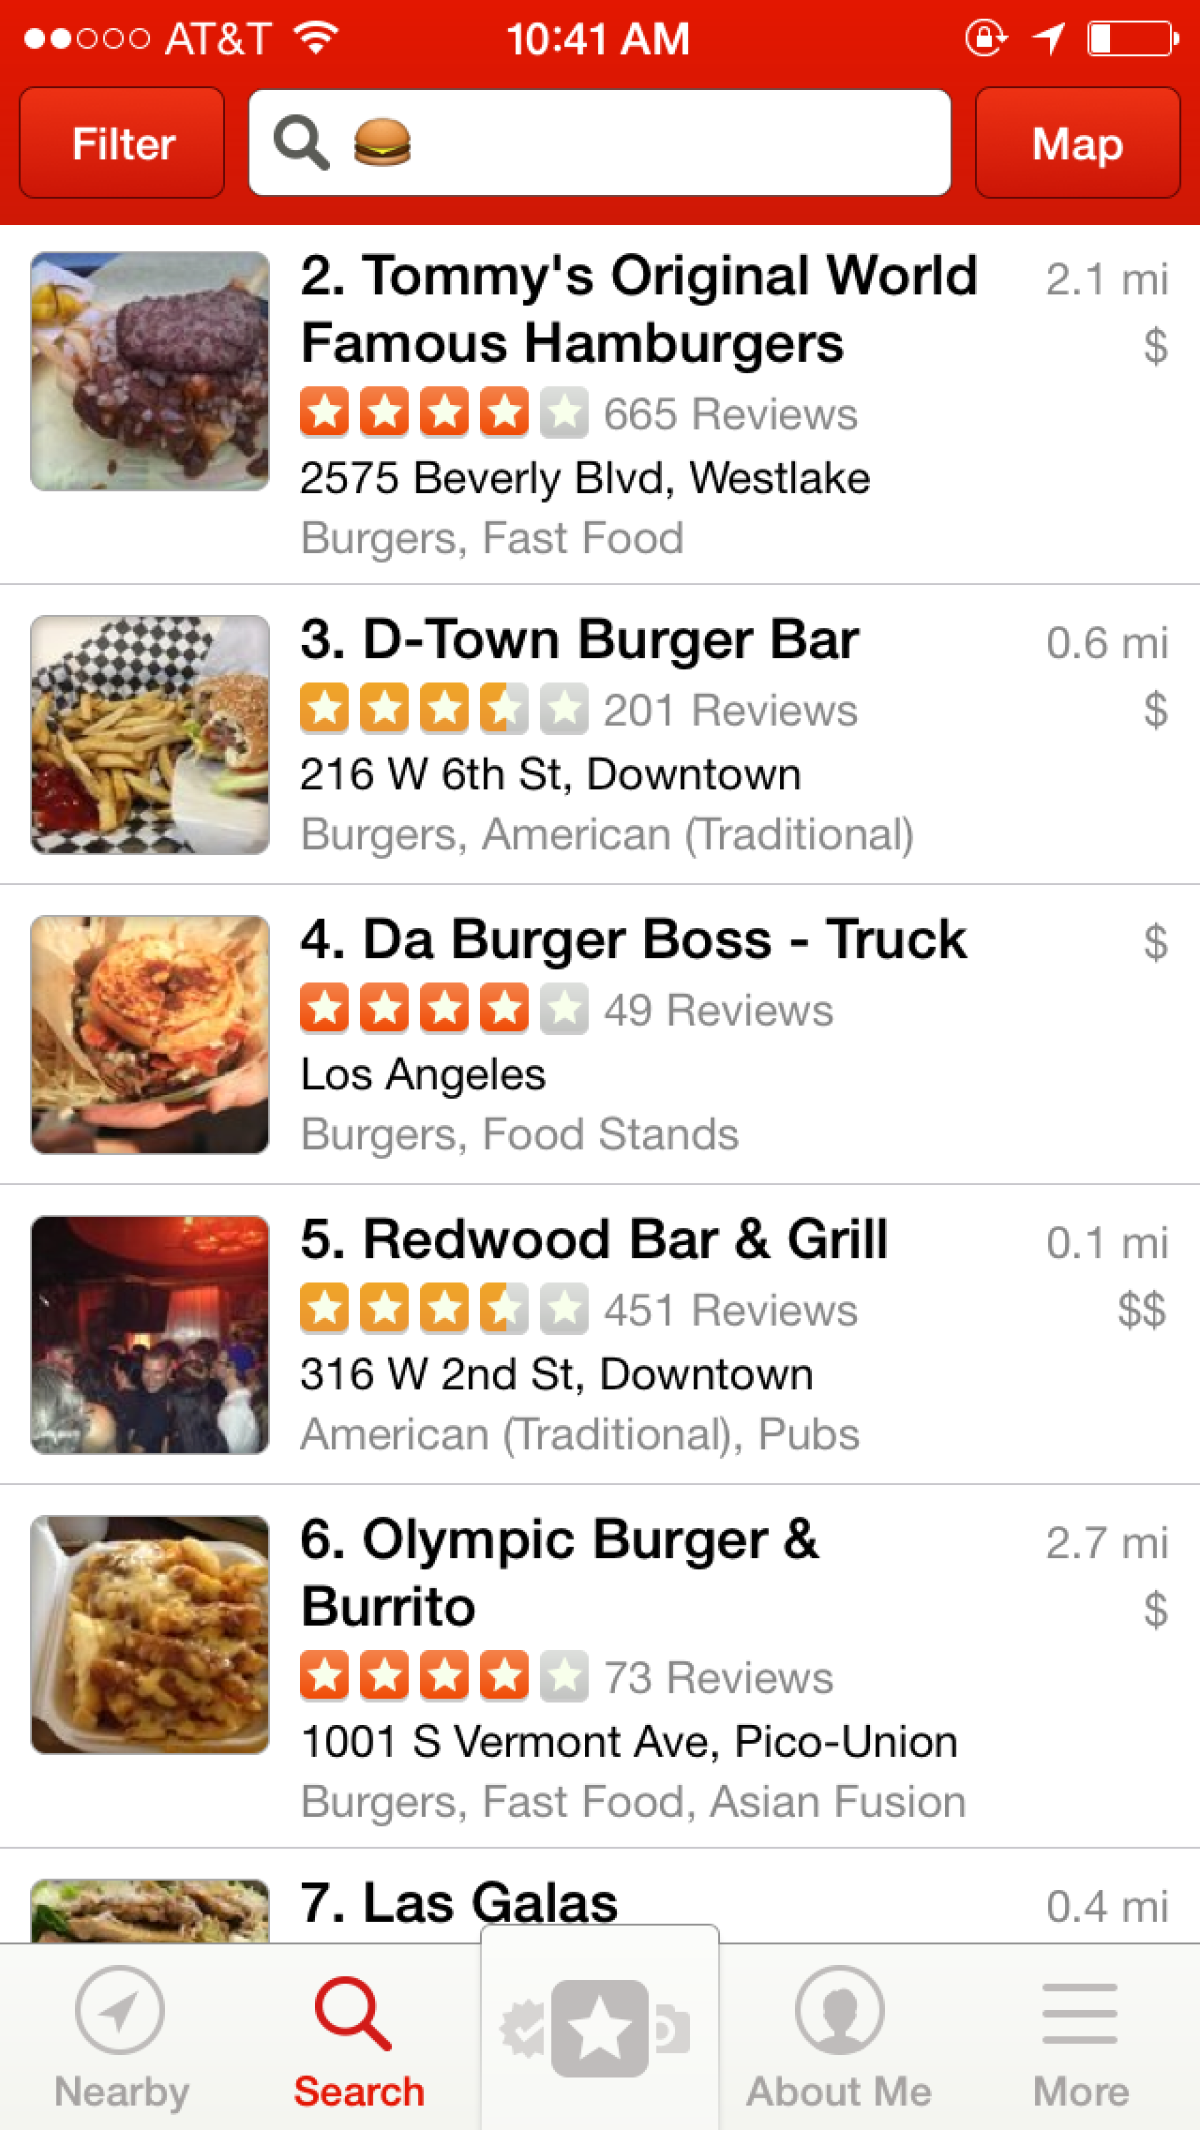 Android and Apple iOS users can now search on Yelp using emoji icons.